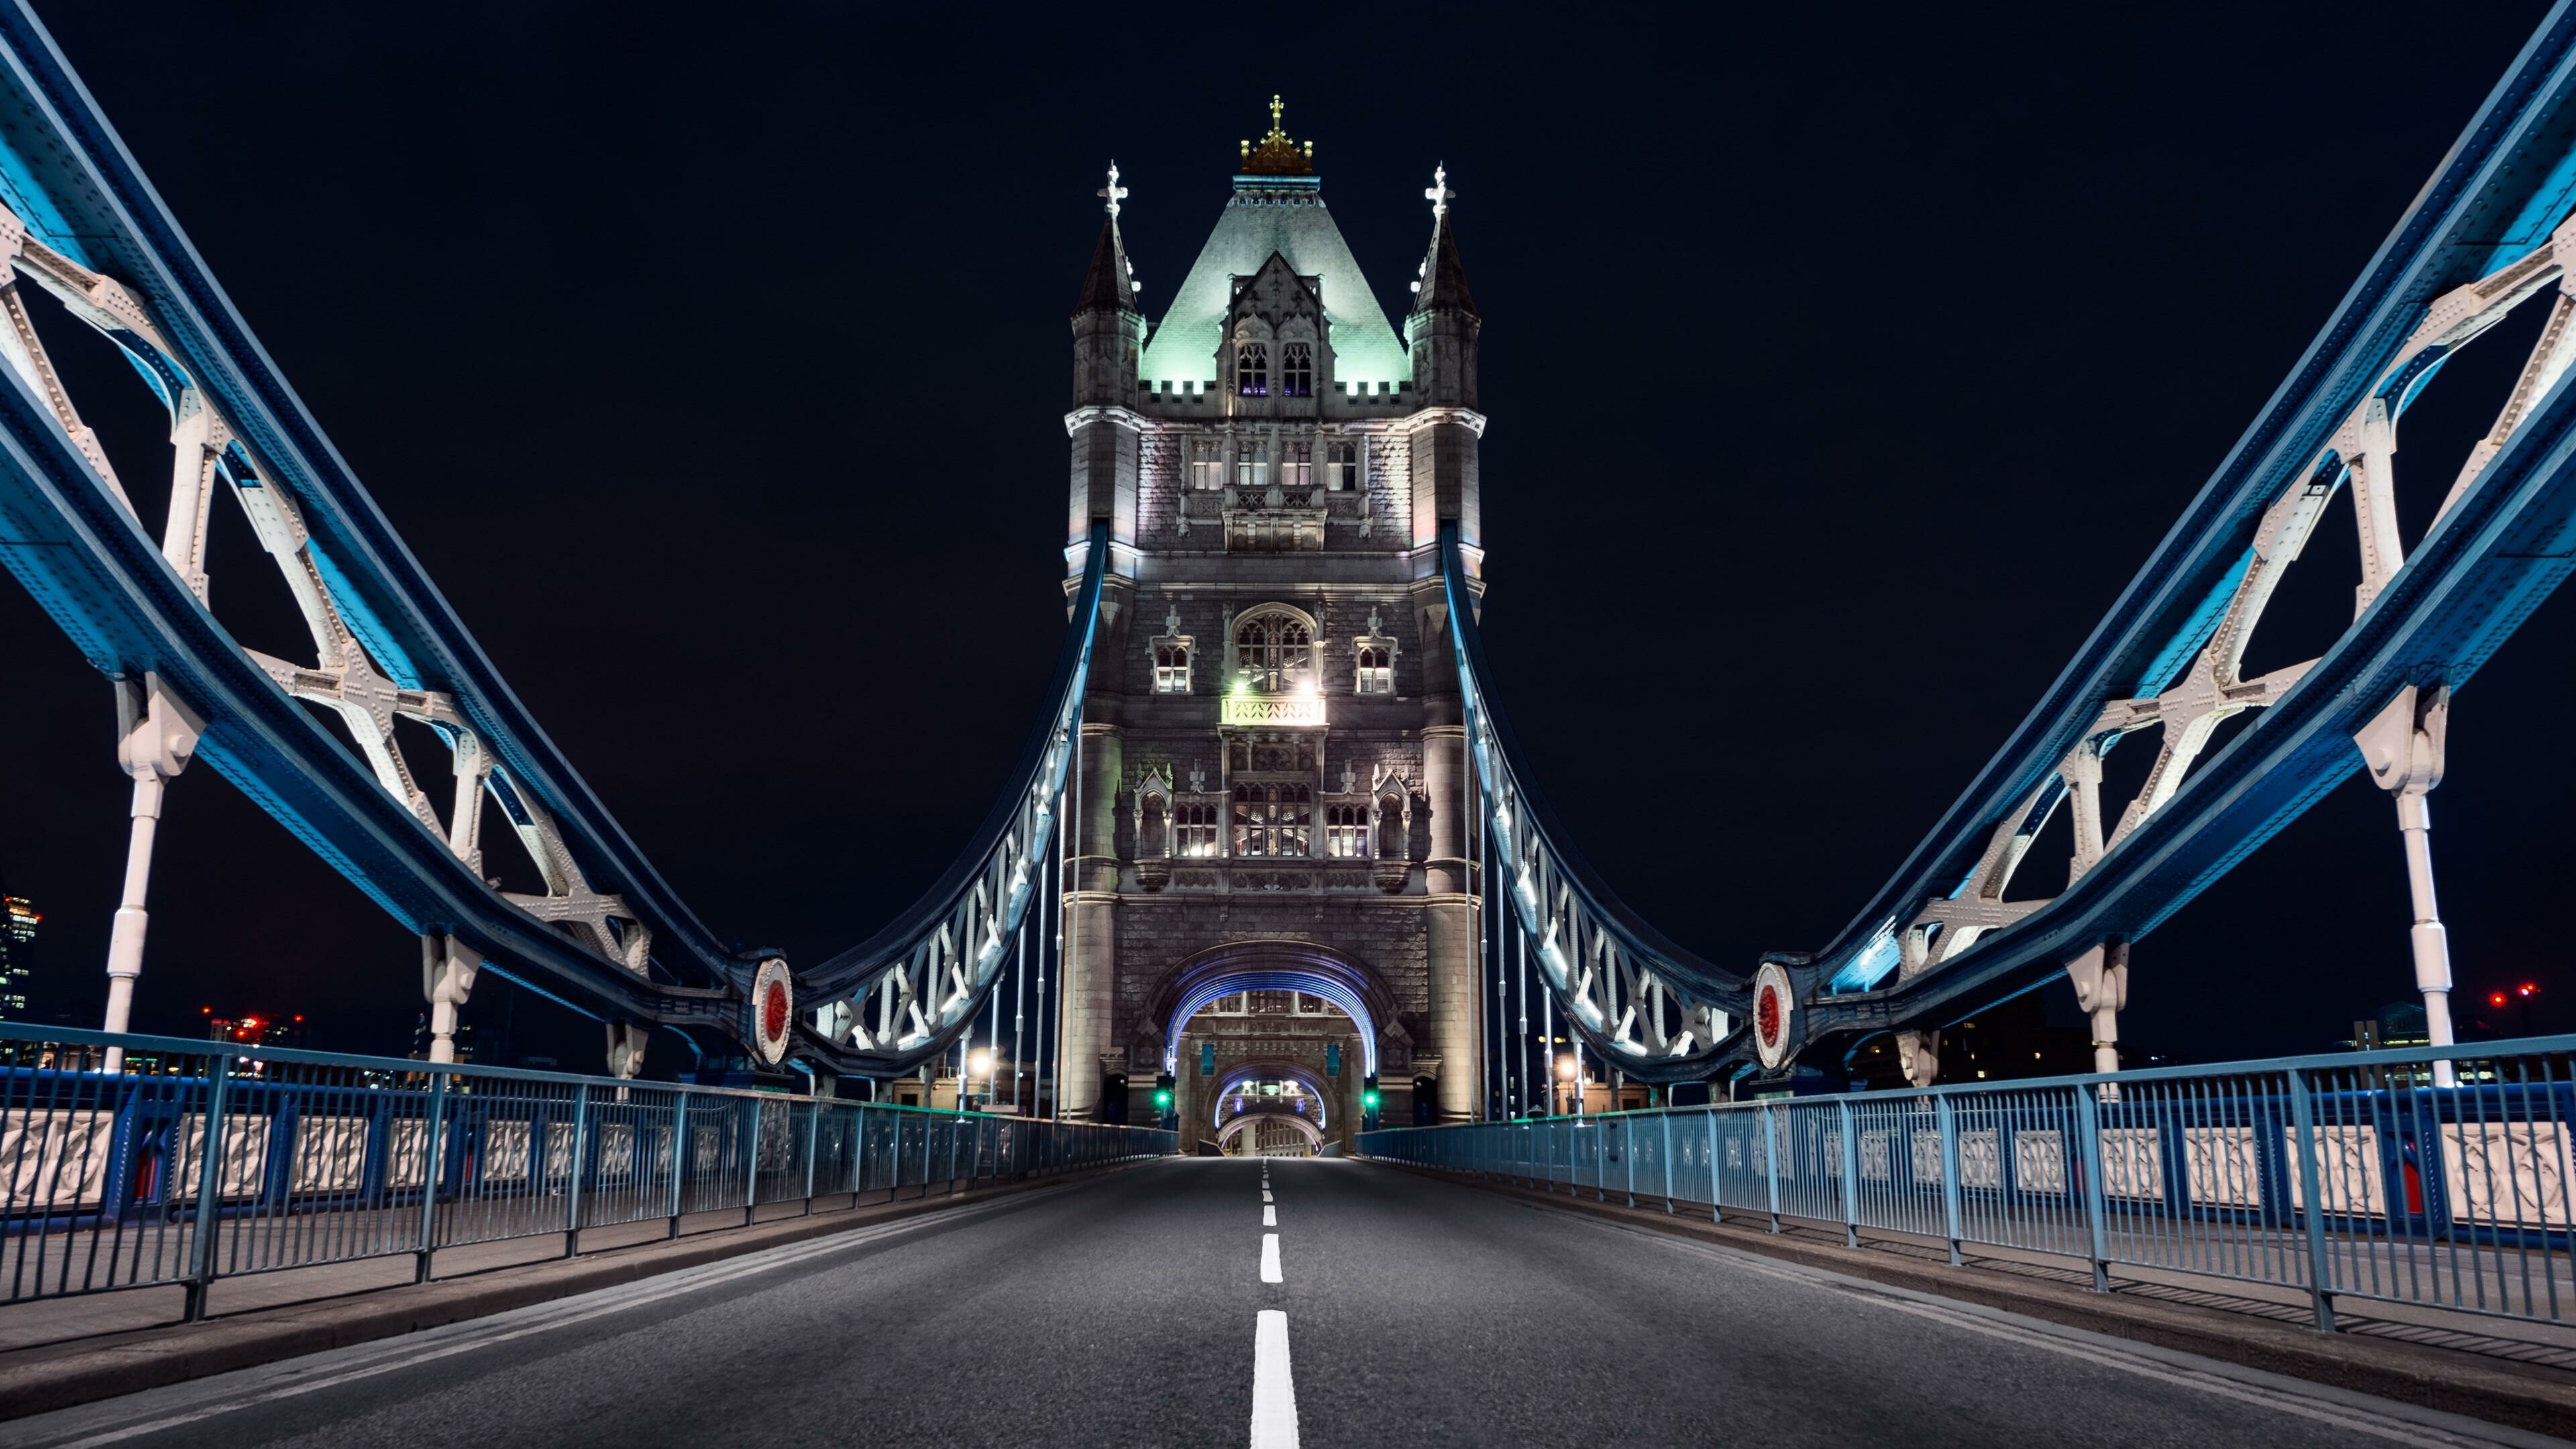 Tower Bridge: Famous worldwide for its striking design and neo-Gothic architecture, Infrastructure. 3840x2160 4K Wallpaper.